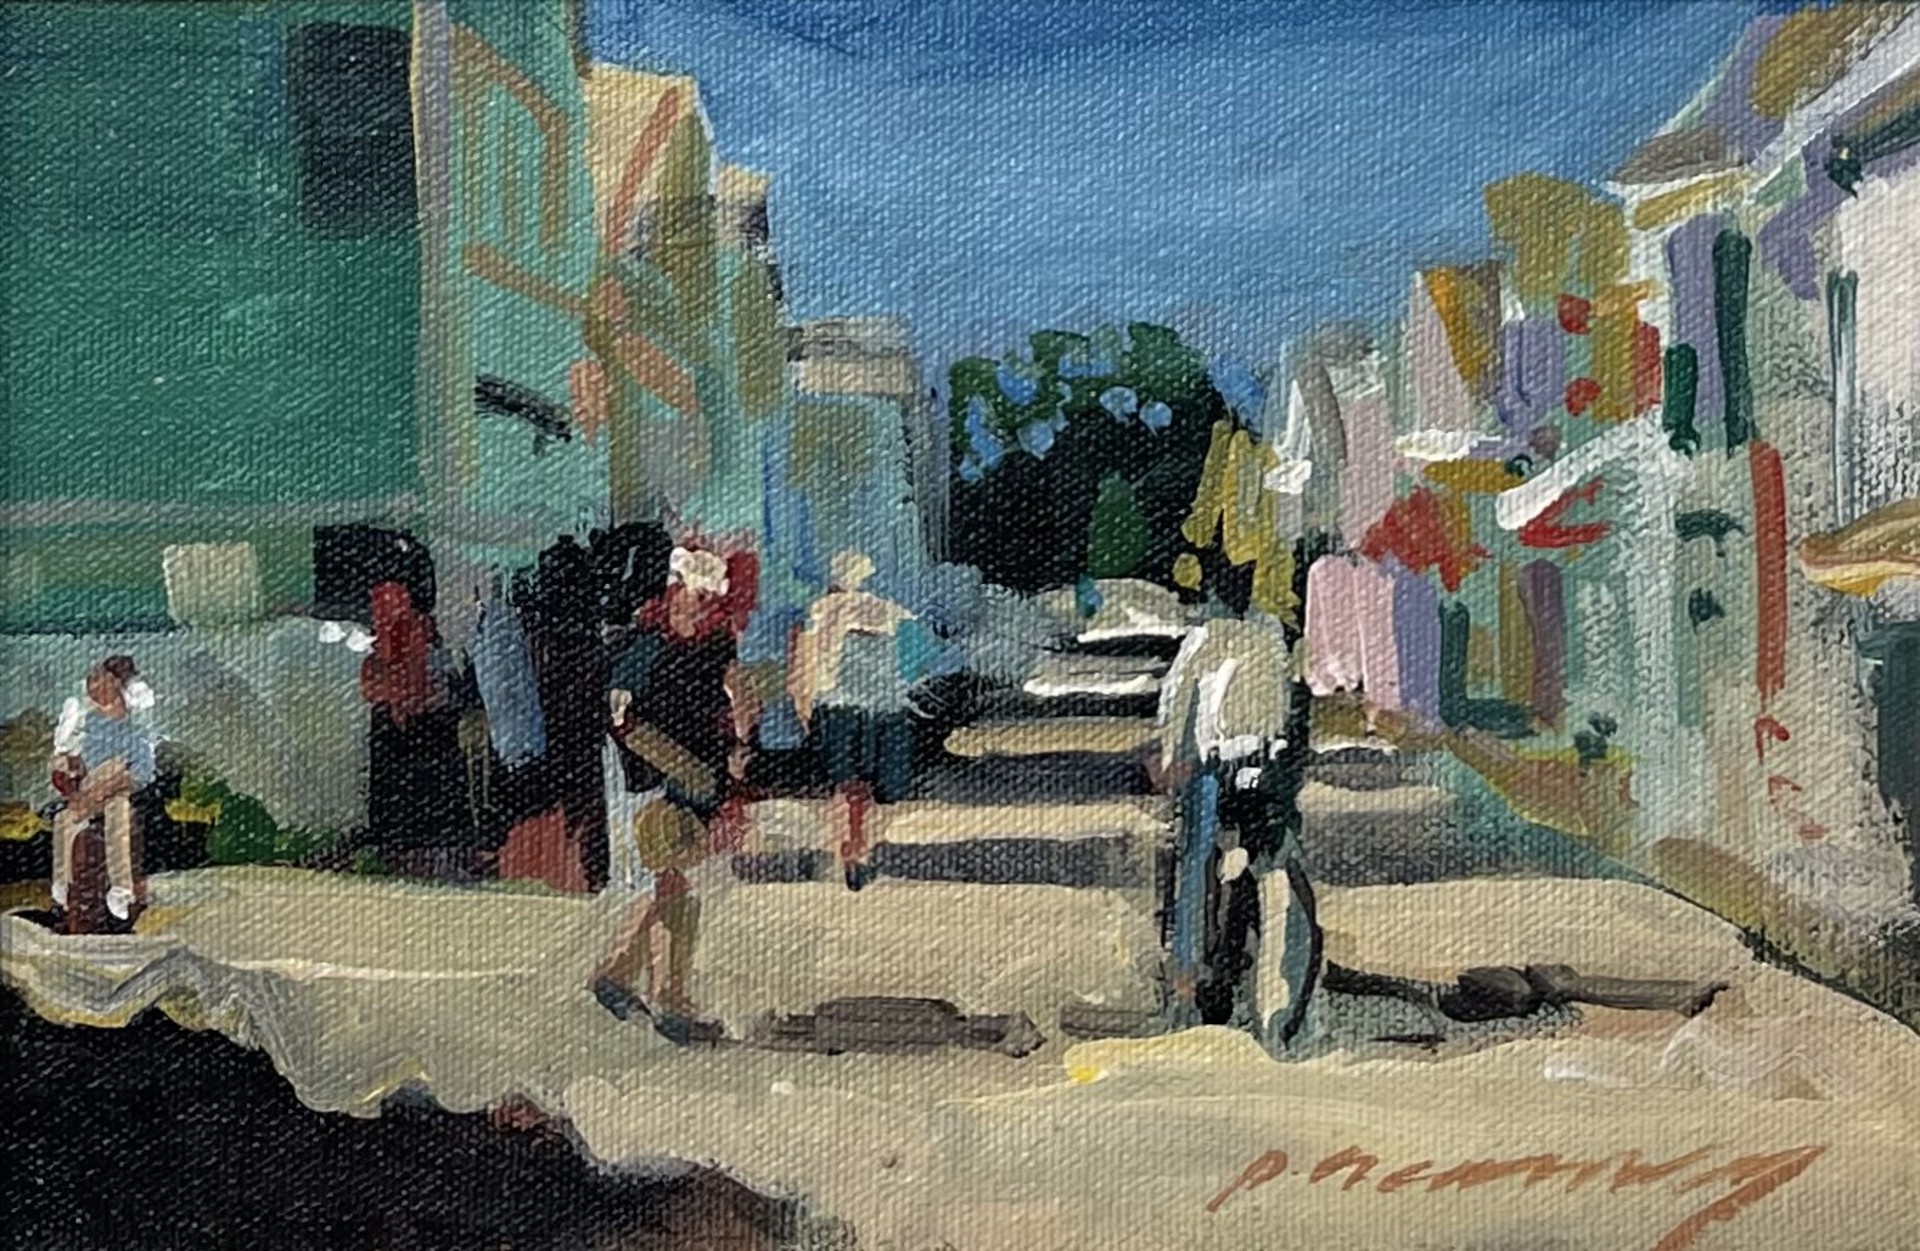 A Walk on Commercial Street by P.A. Canney